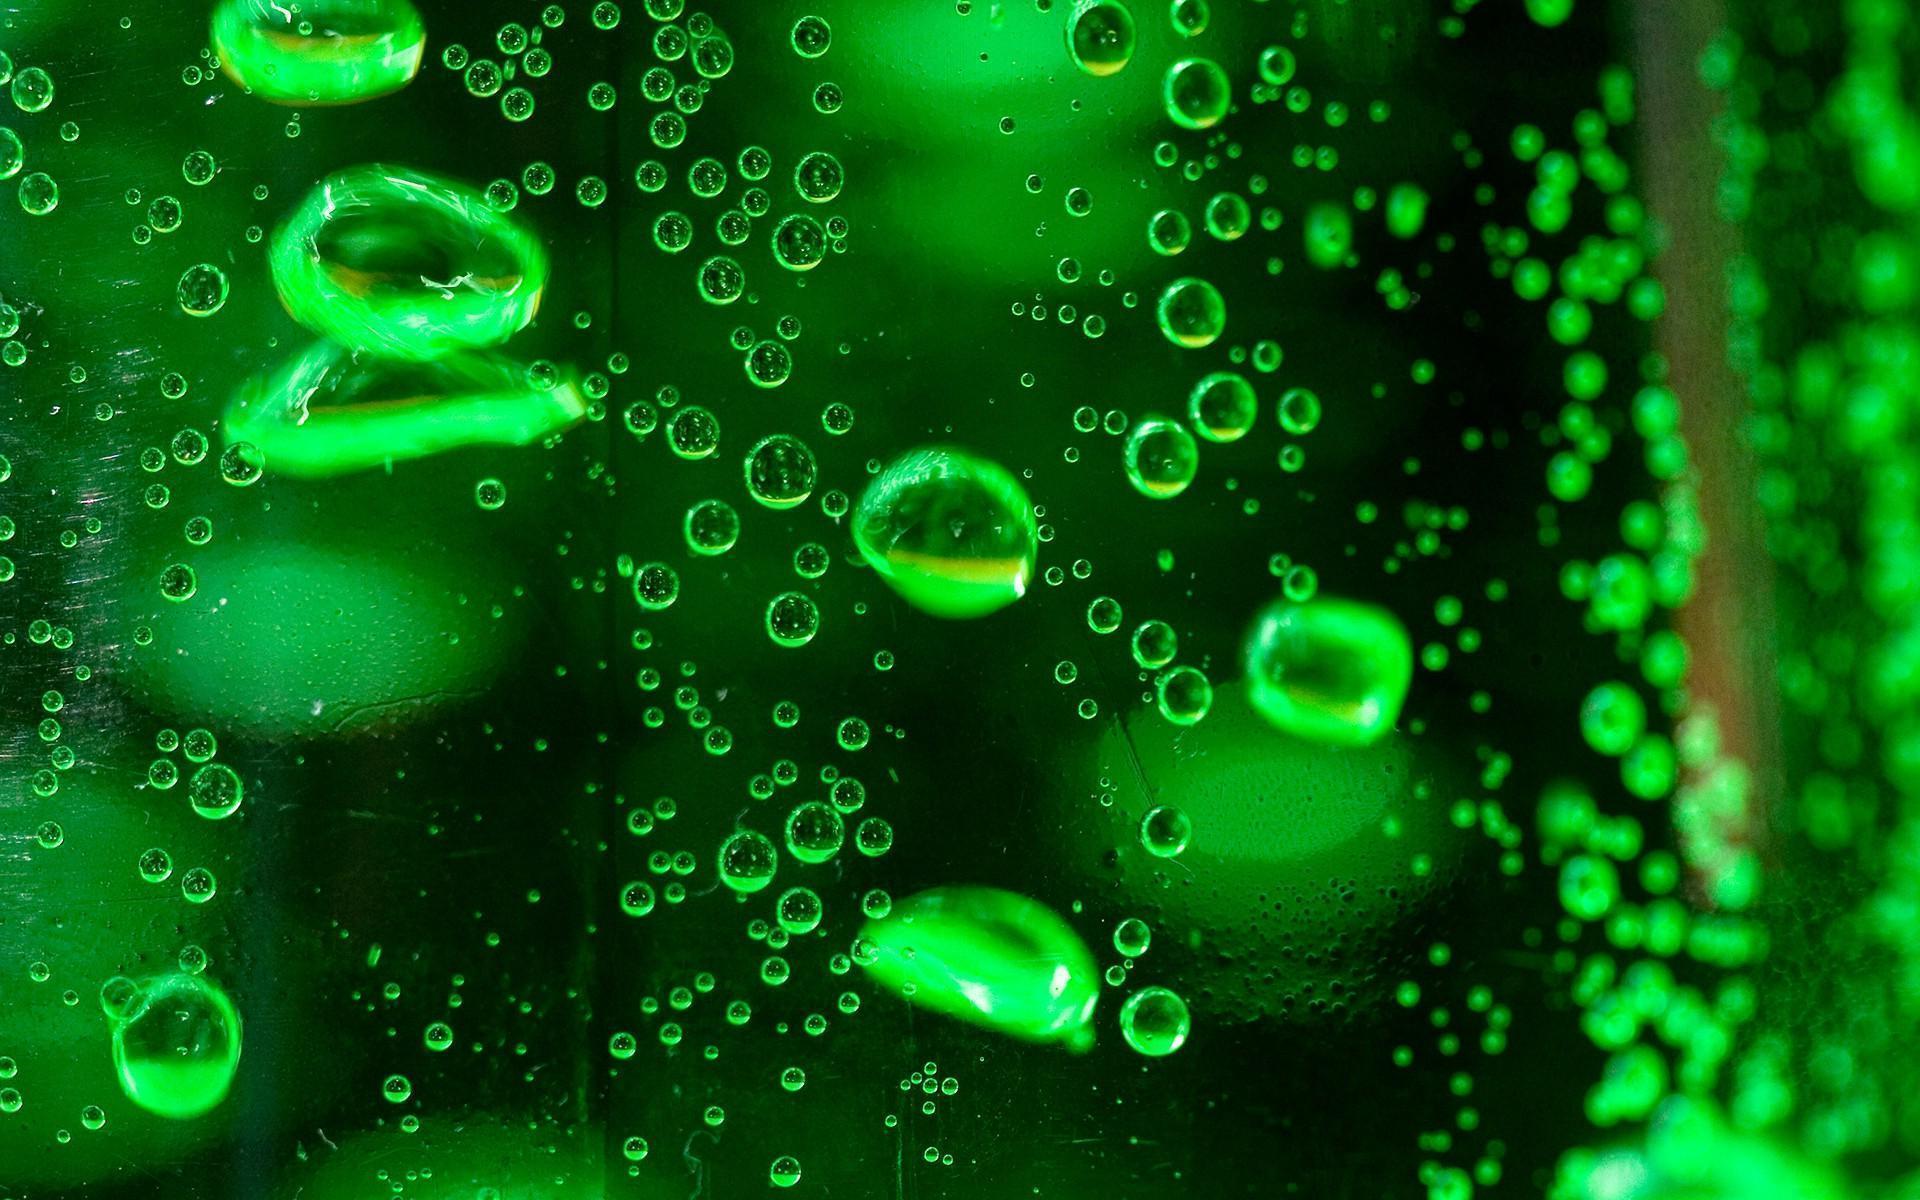 The Bubbly Fizzy Drinks Wallpaper